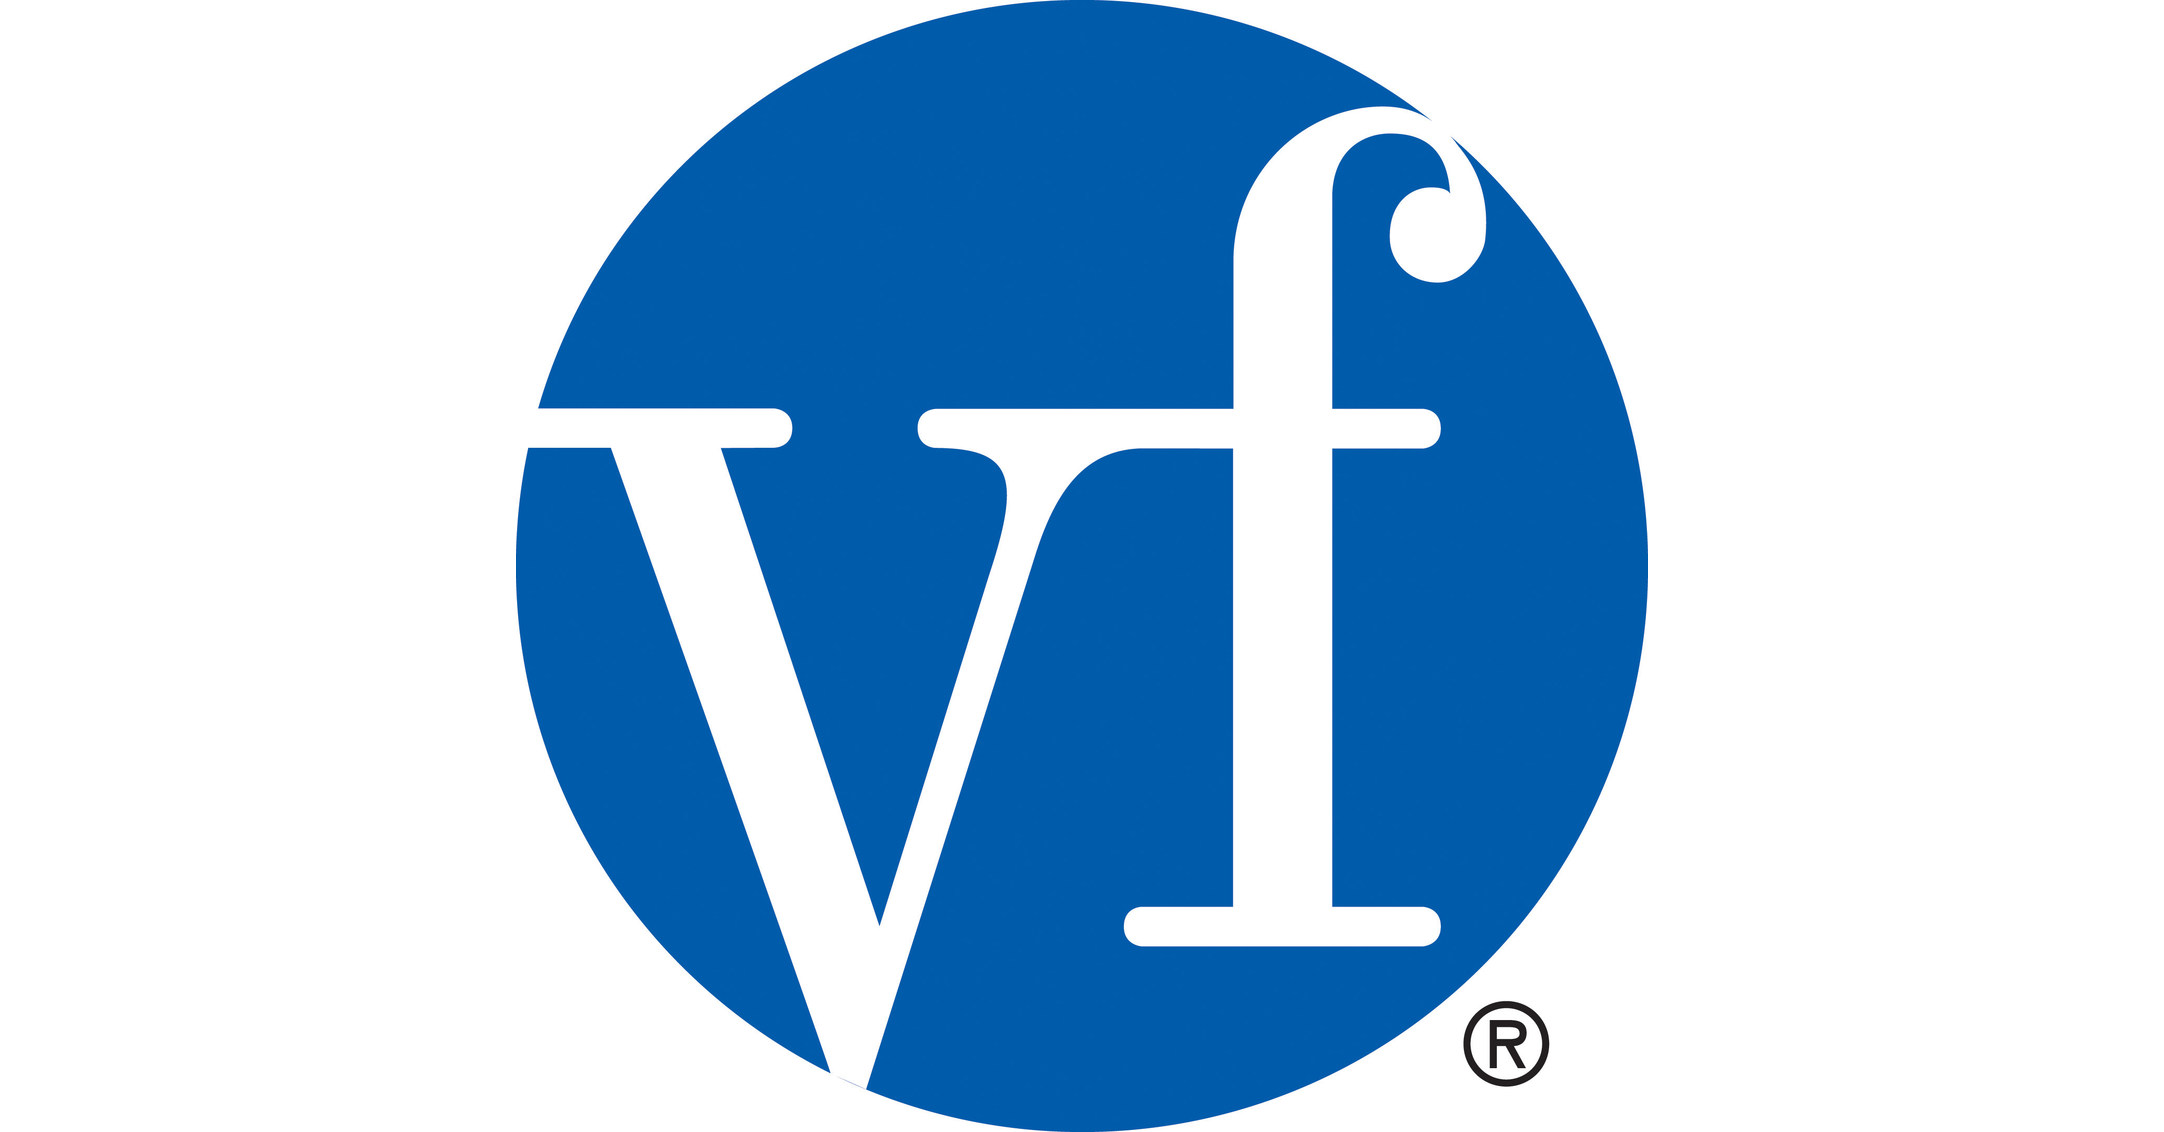 VF Corp announces full year results